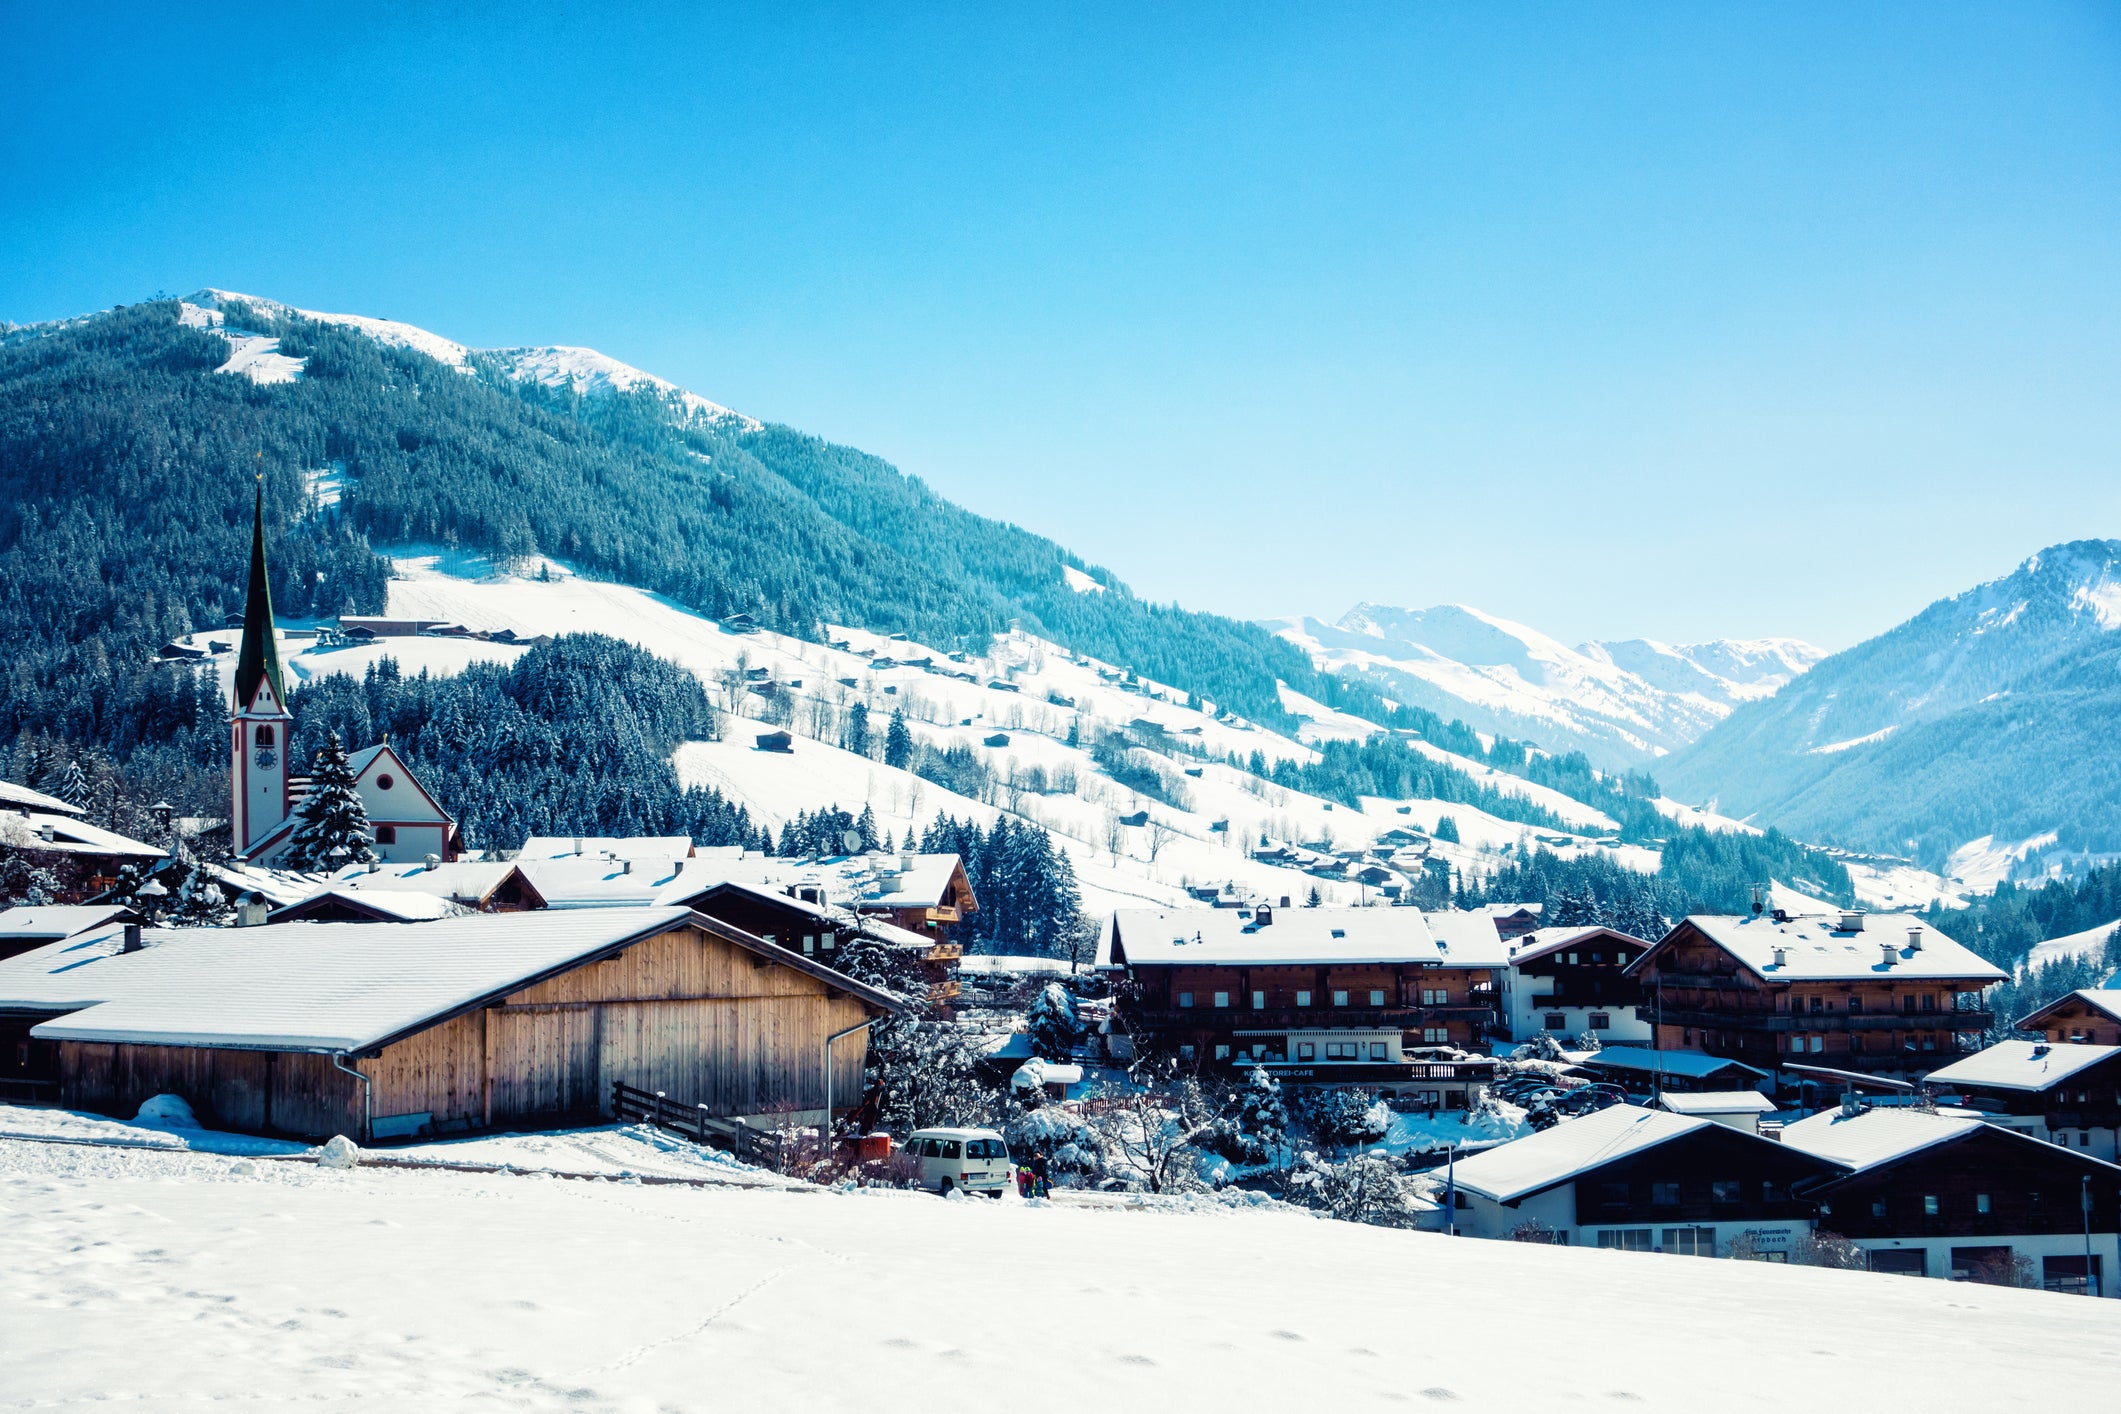 Nursery areas at village level make Alpbach a great resort for first-timers